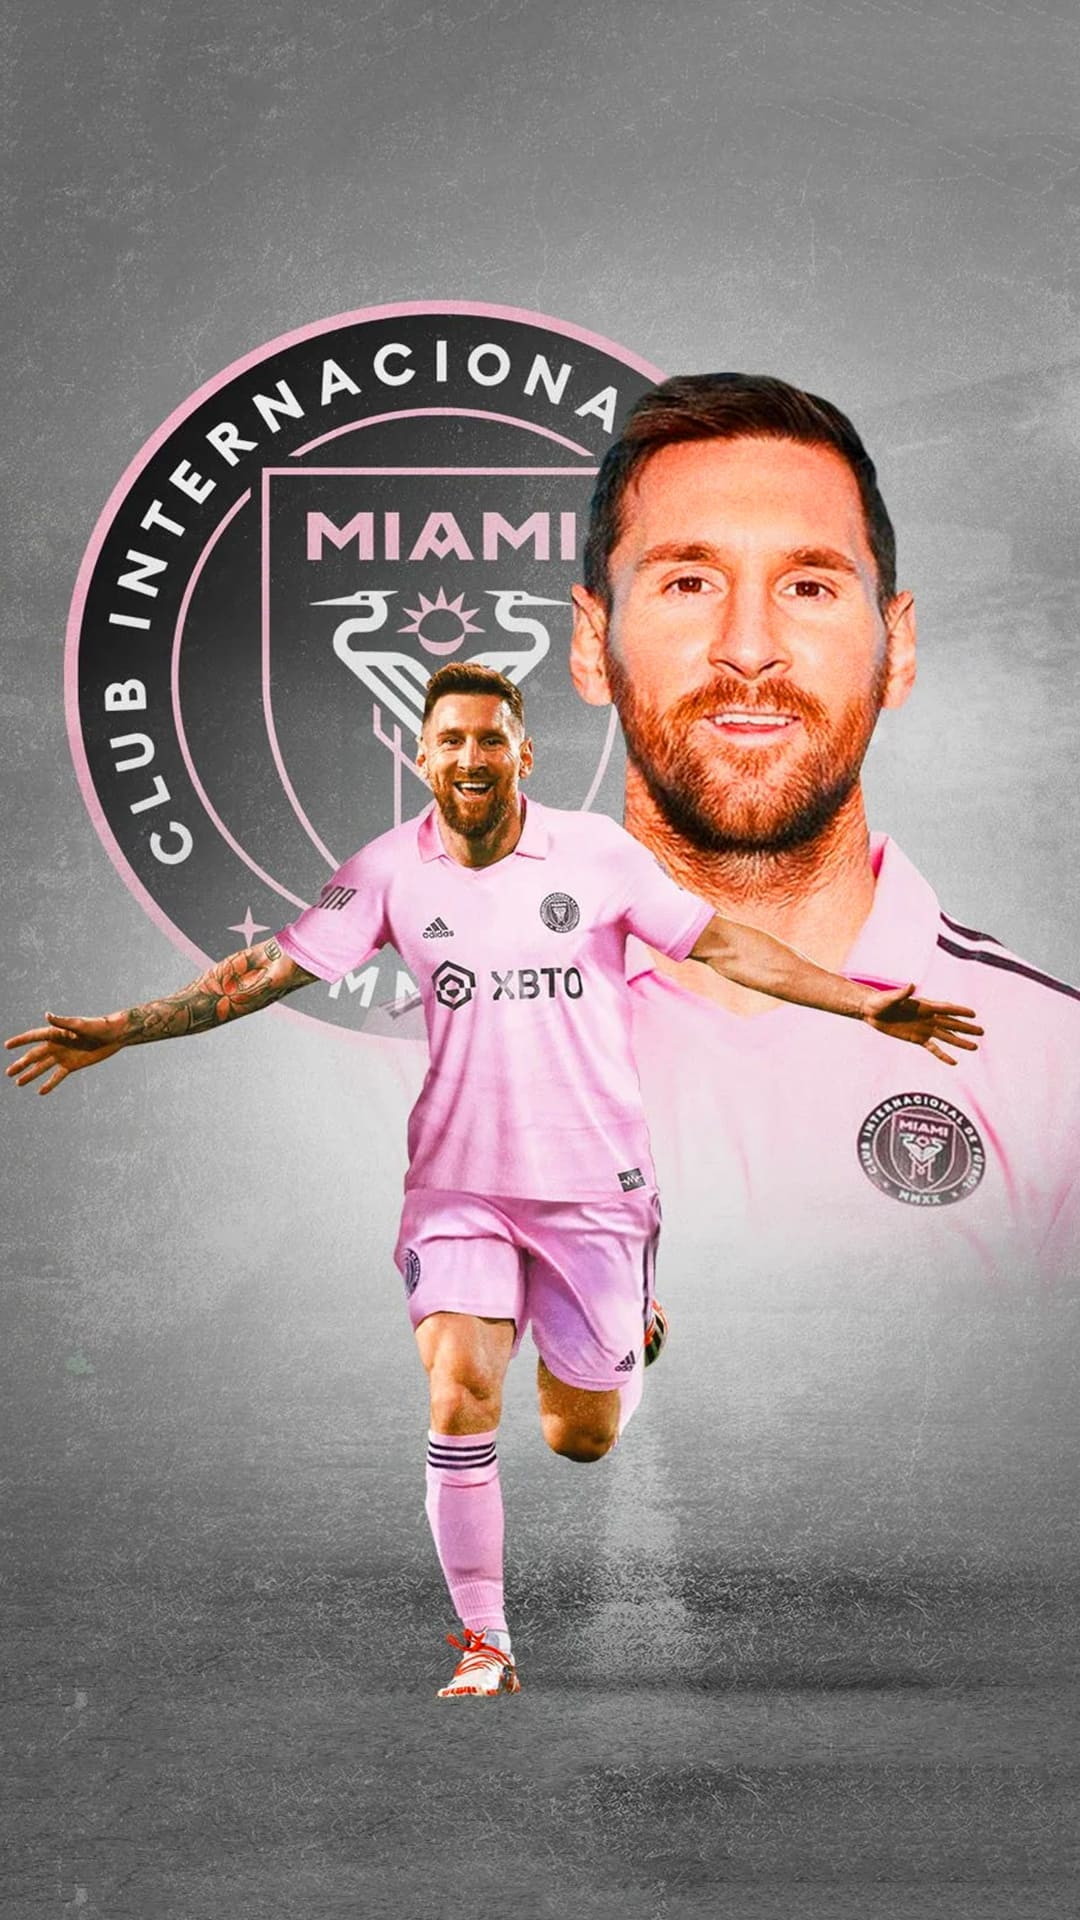 Wallpapers Phone Lionel Messi Inter Miami With high-resolution 1080X1920 pixel. You can use this wallpaper for your Android backgrounds, Tablet, Samsung Screensavers, Mobile Phone Lock Screen and another Smartphones device